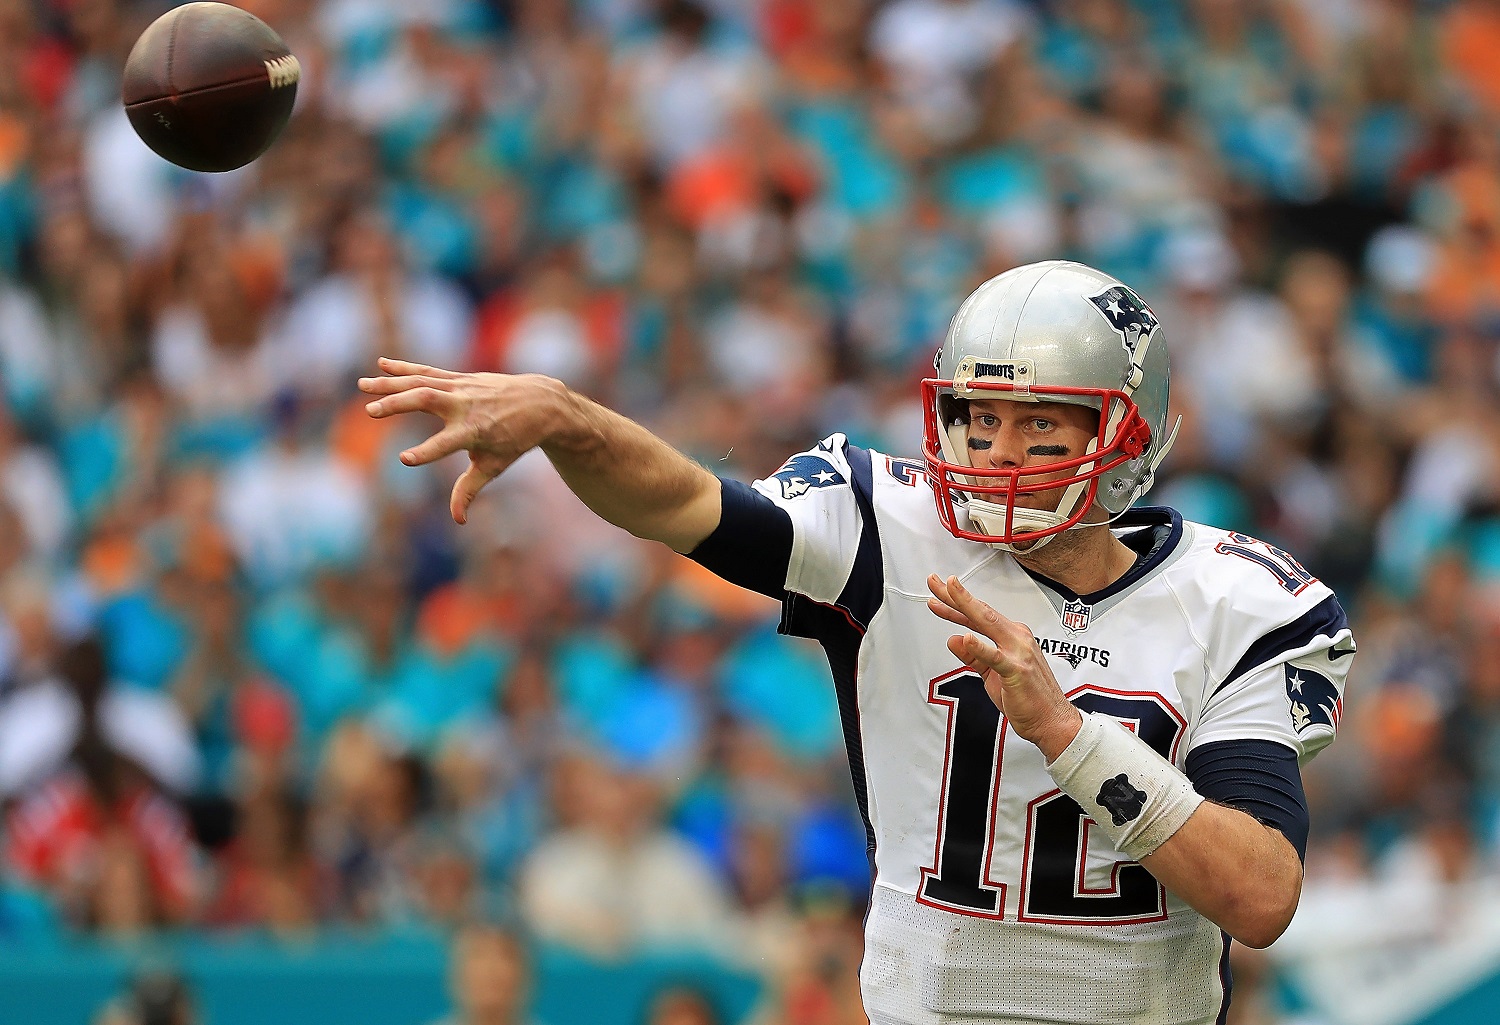 MIAMI GARDENS, FL - JANUARY 01:  Tom Brady #12 of the New England Patriots passes during a game against the Miami Dolphins at Hard Rock Stadium on January 1, 2017 in Miami Gardens, Florida.  (Photo by Mike Ehrmann/Getty Images)